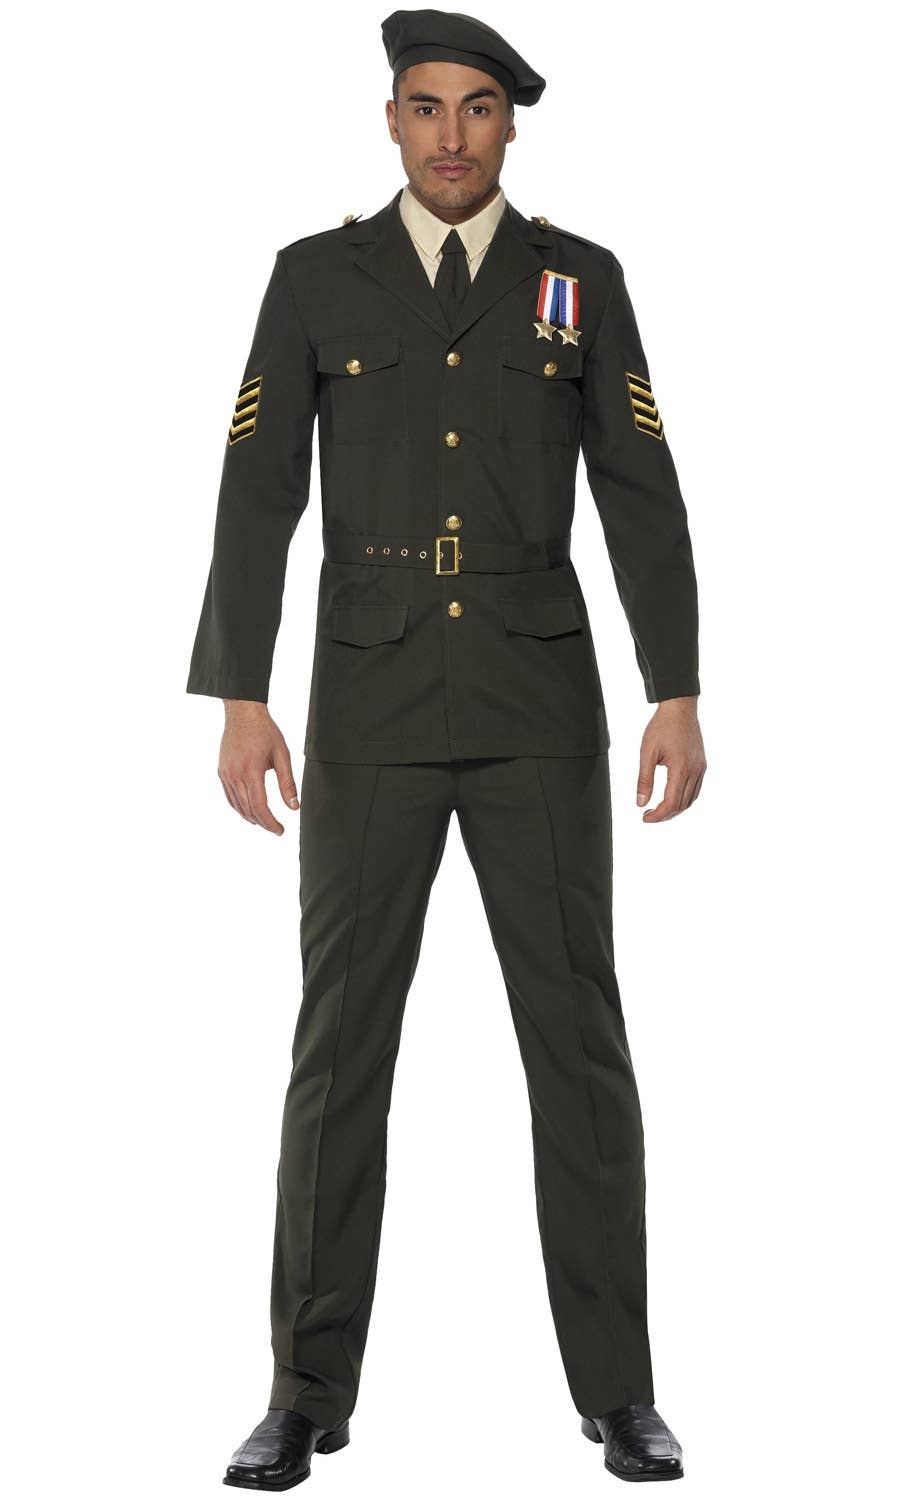 Wartime Officer Men's Military Soldier Costume Image 1